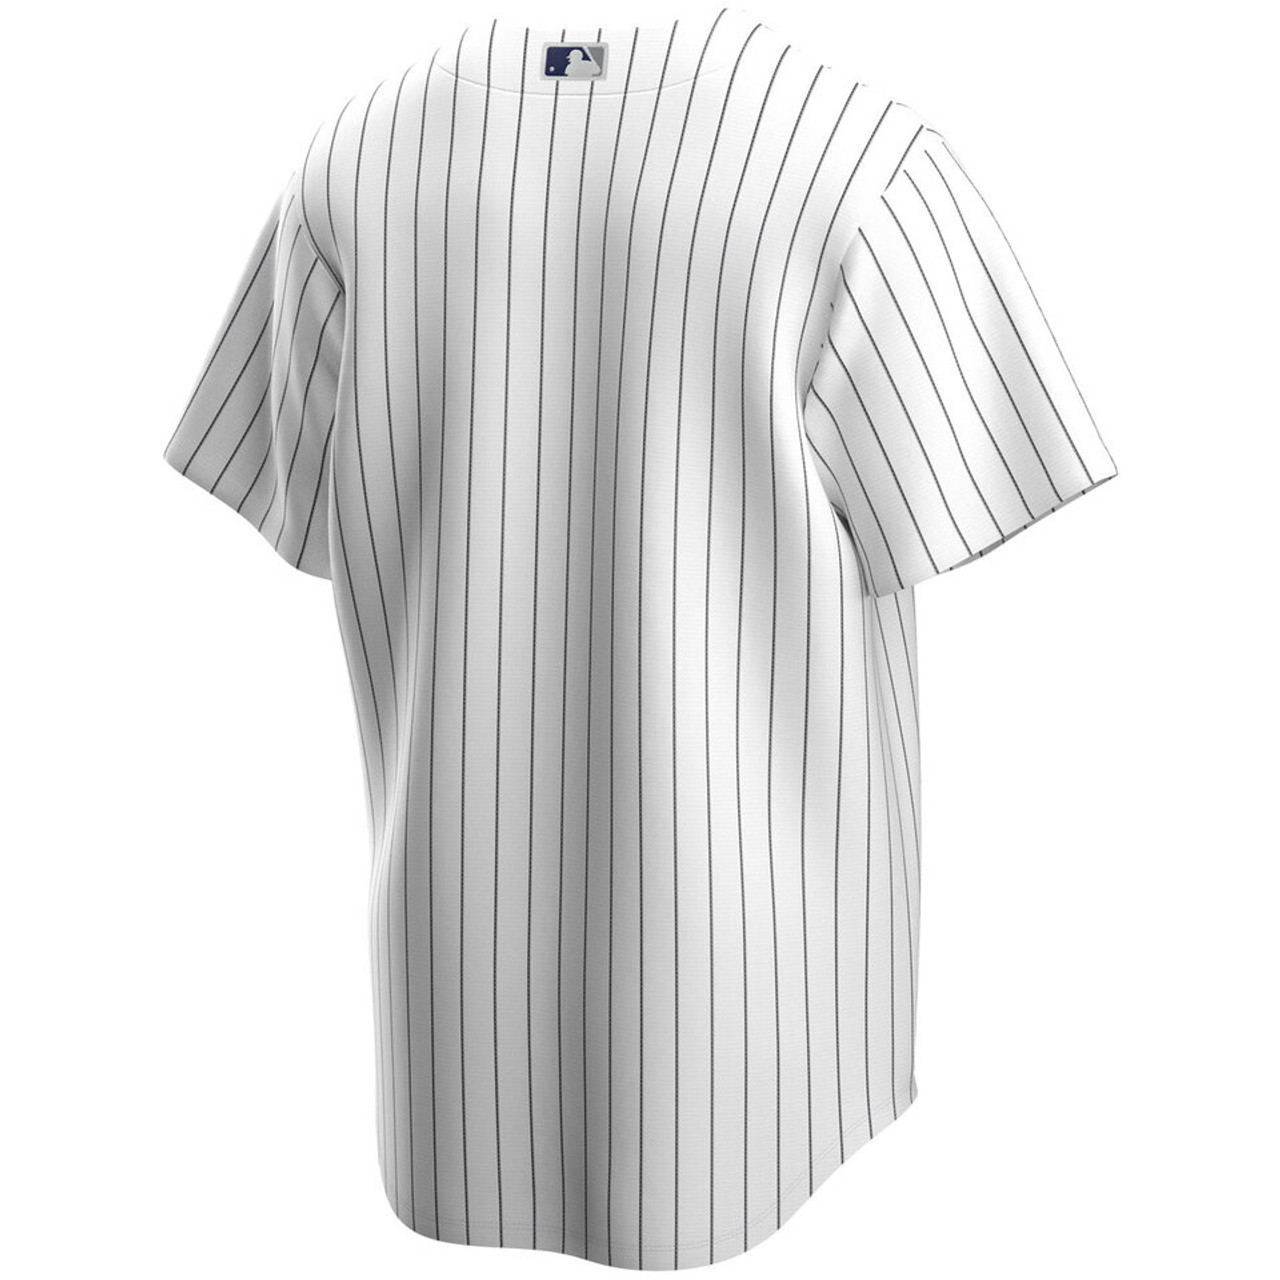 Thurman Munson Jersey - NY Yankees Pinstripe Cooperstown Replica